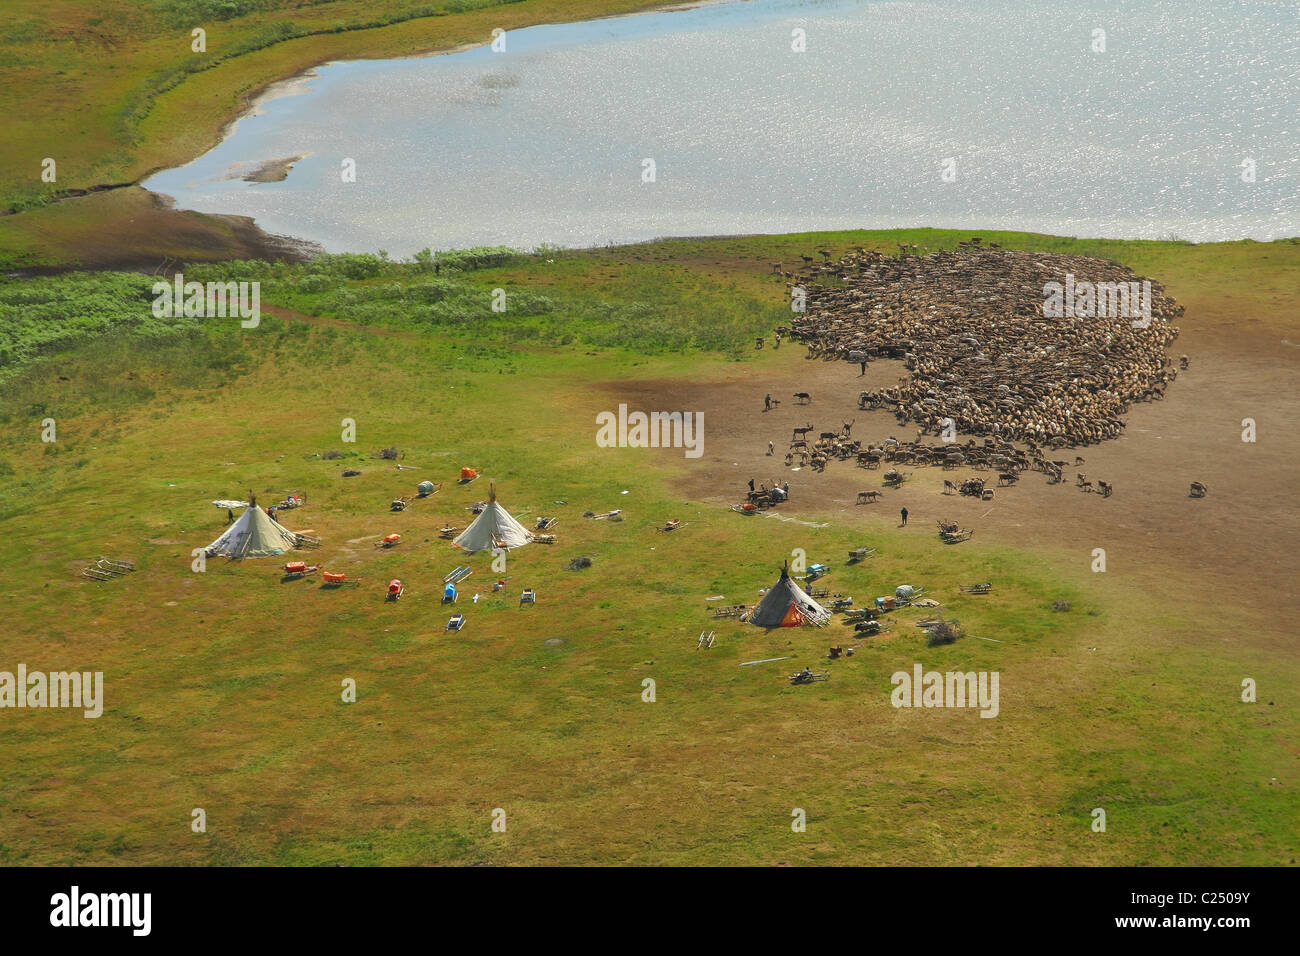 Camp of nenets herders in the tundra with a bird's-eye view. Nenets Autonomous Okrug, Arkhangelsk Oblast, Russia Stock Photo